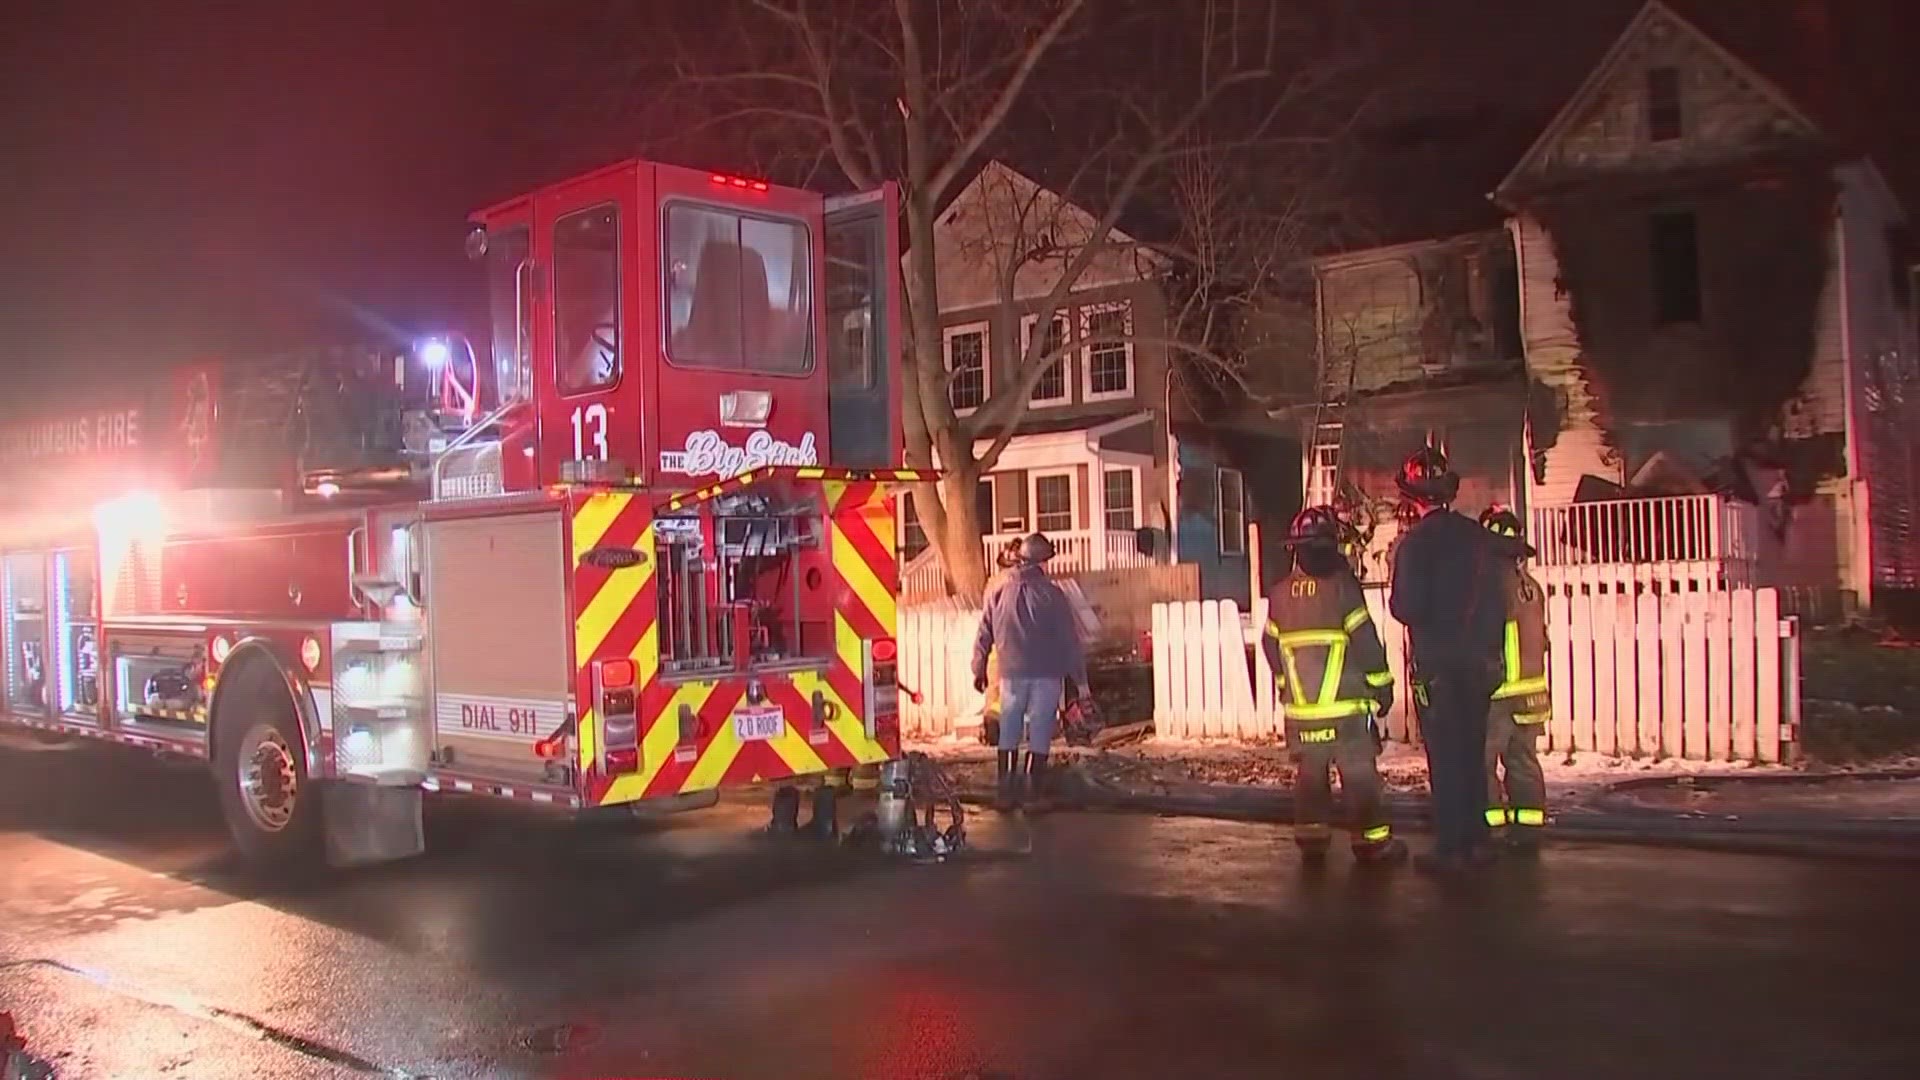 The fire started around 7:50 p.m. at a home located in the 1600 block of Genessee Avenue.